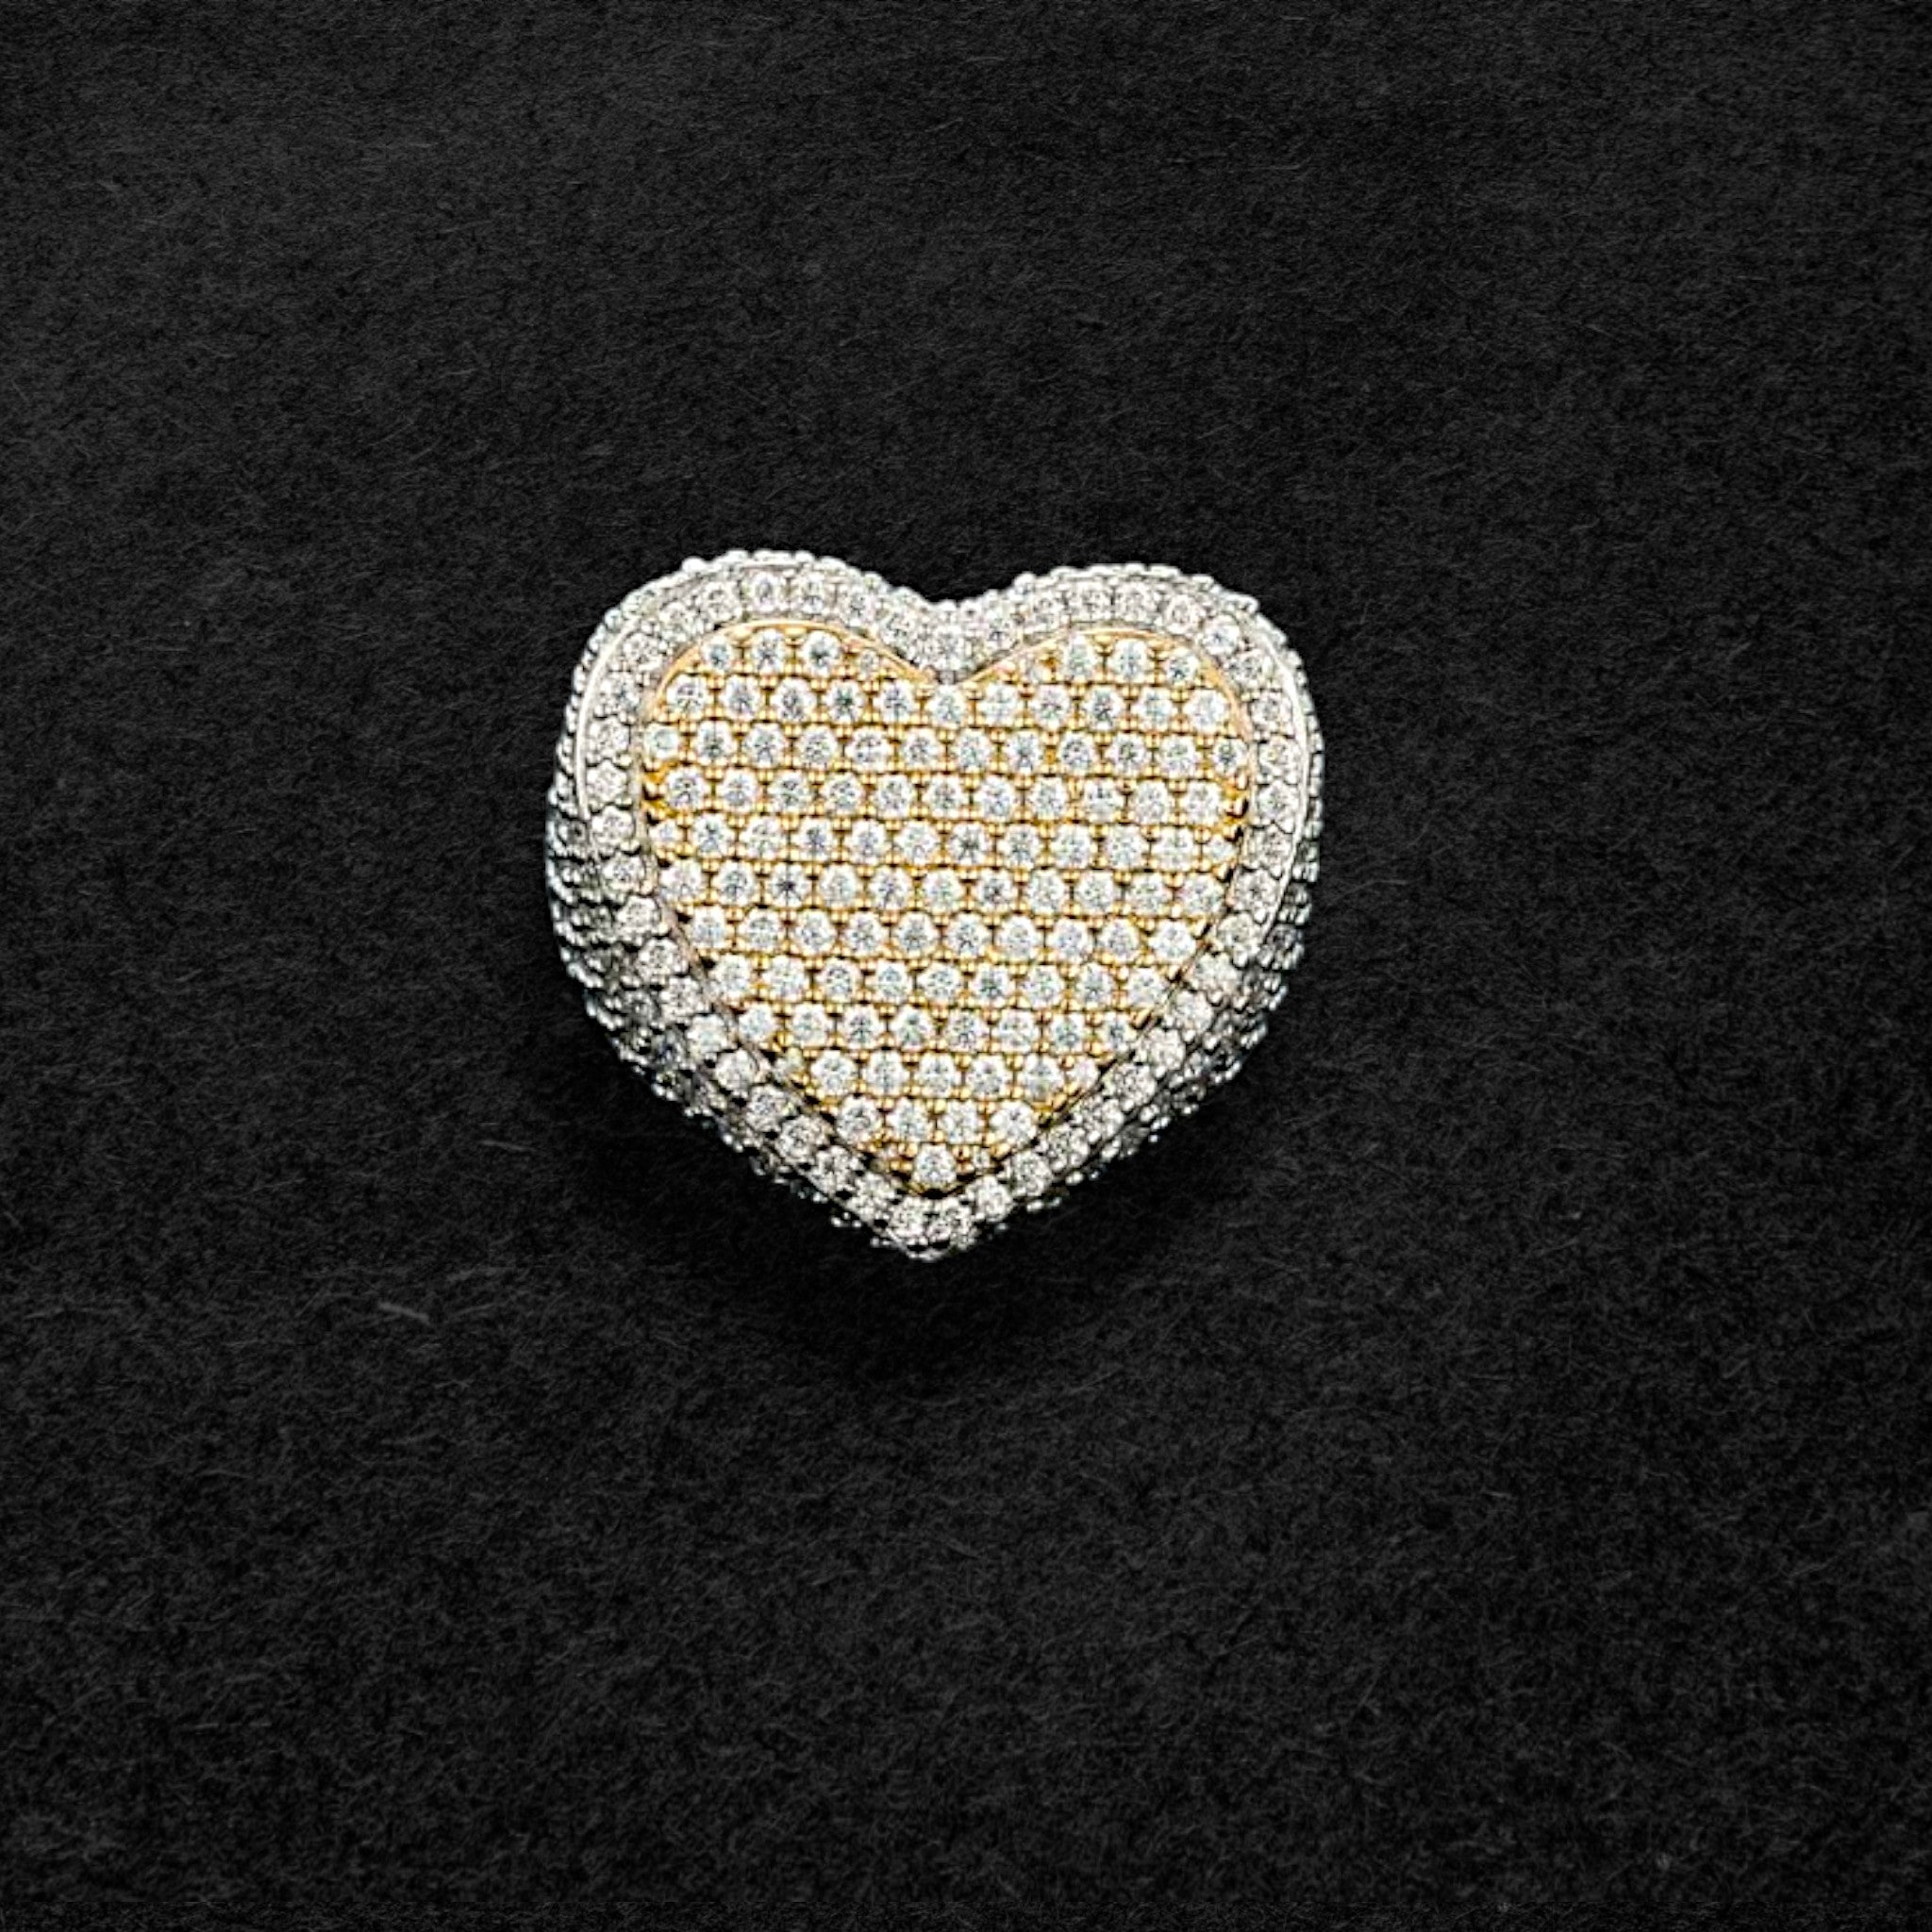 Flashy Two-Tone Moissanite Heart Shaped Ring